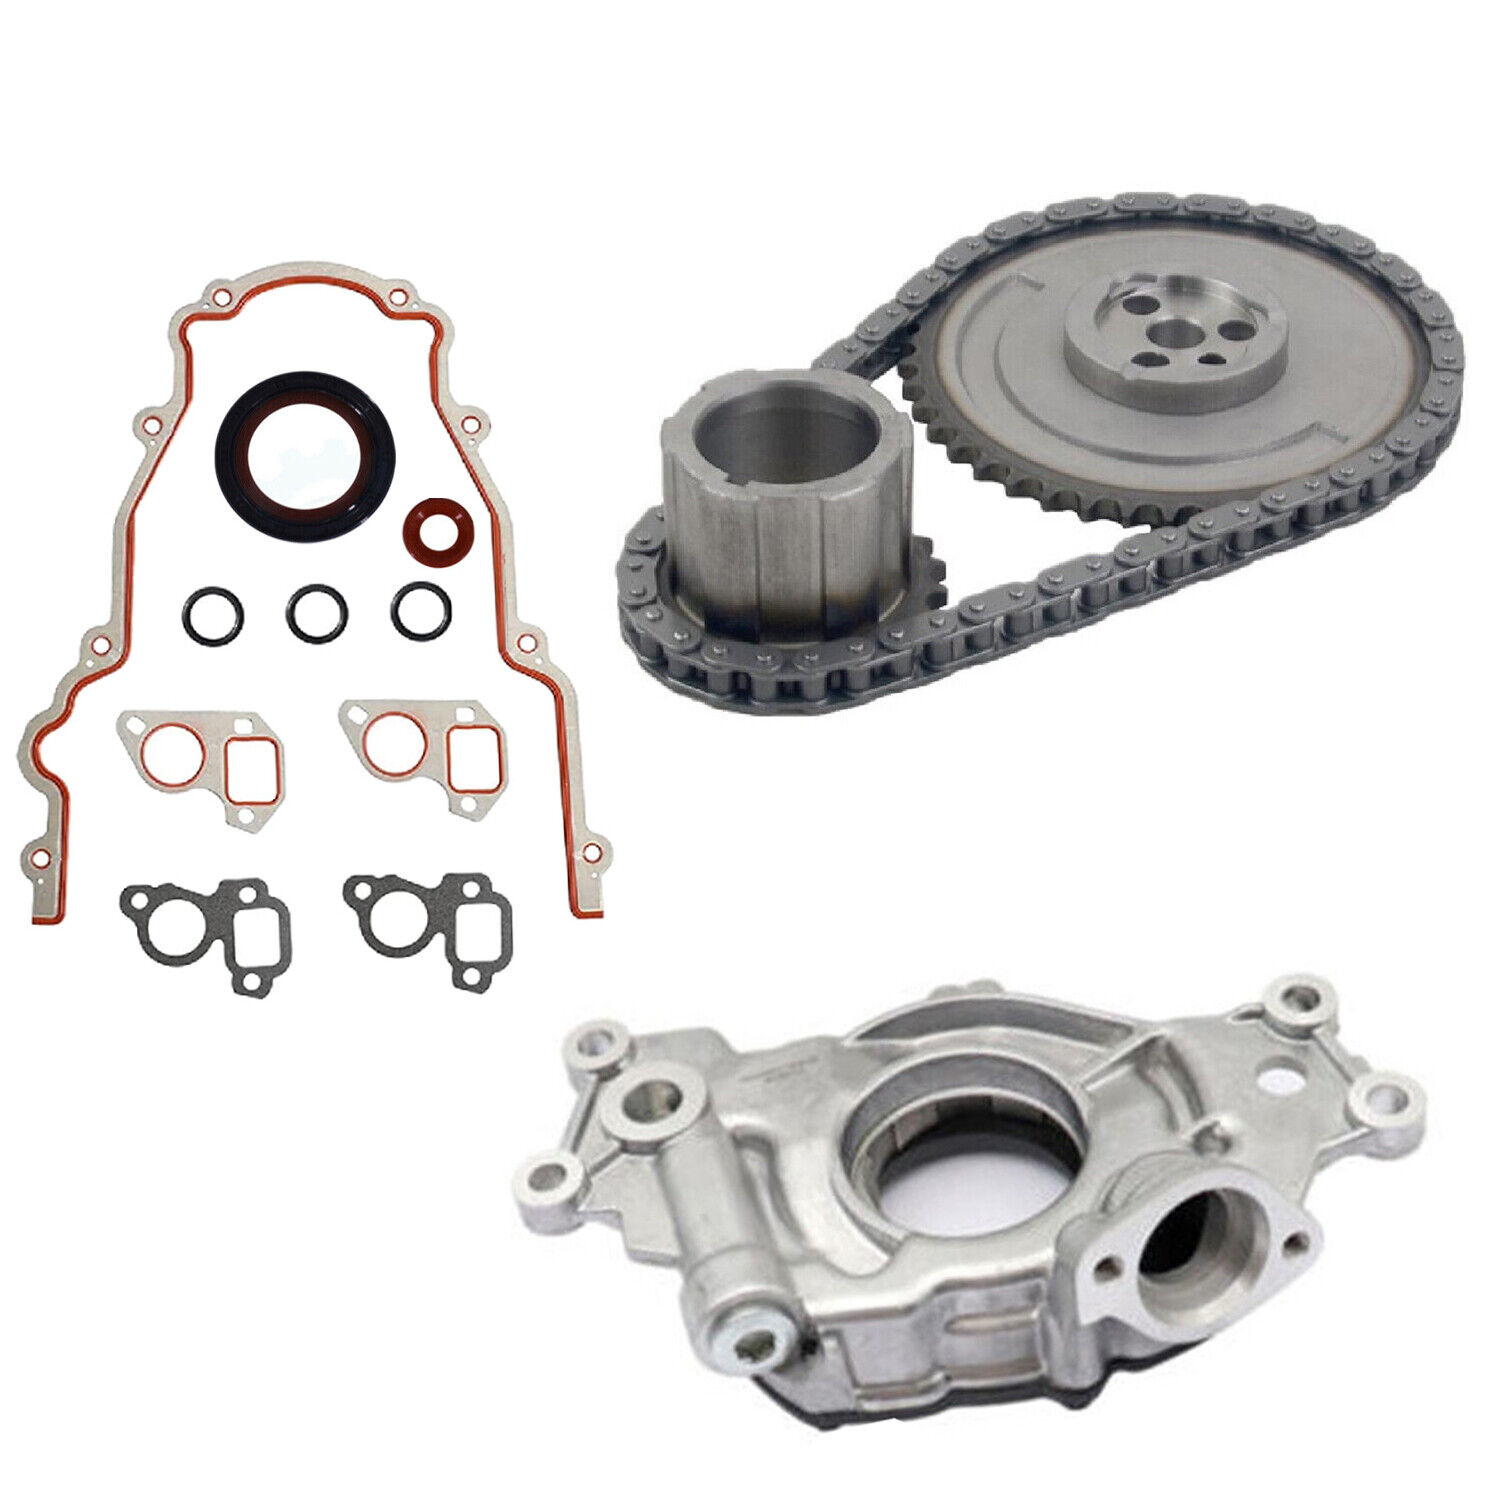 LS High Volume Oil Pump Parts Change Kit+Gaskets &Timing Chain For RTV 5.3L 6.0L